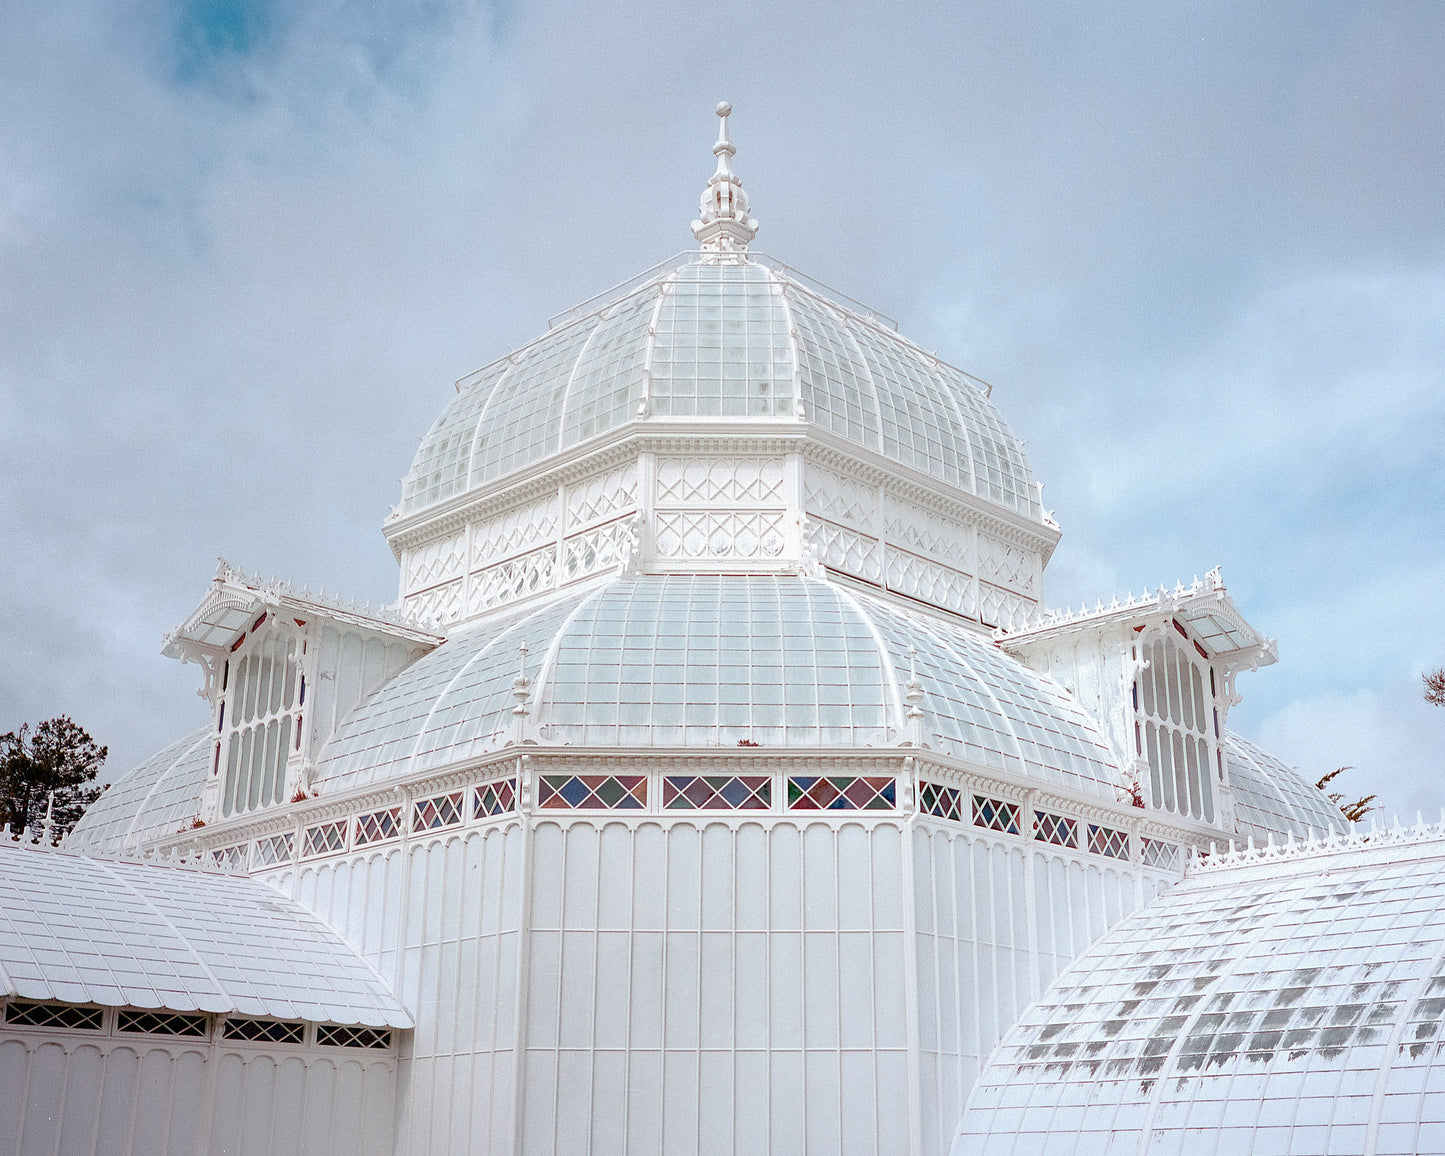 Conservatory of Flowers 1